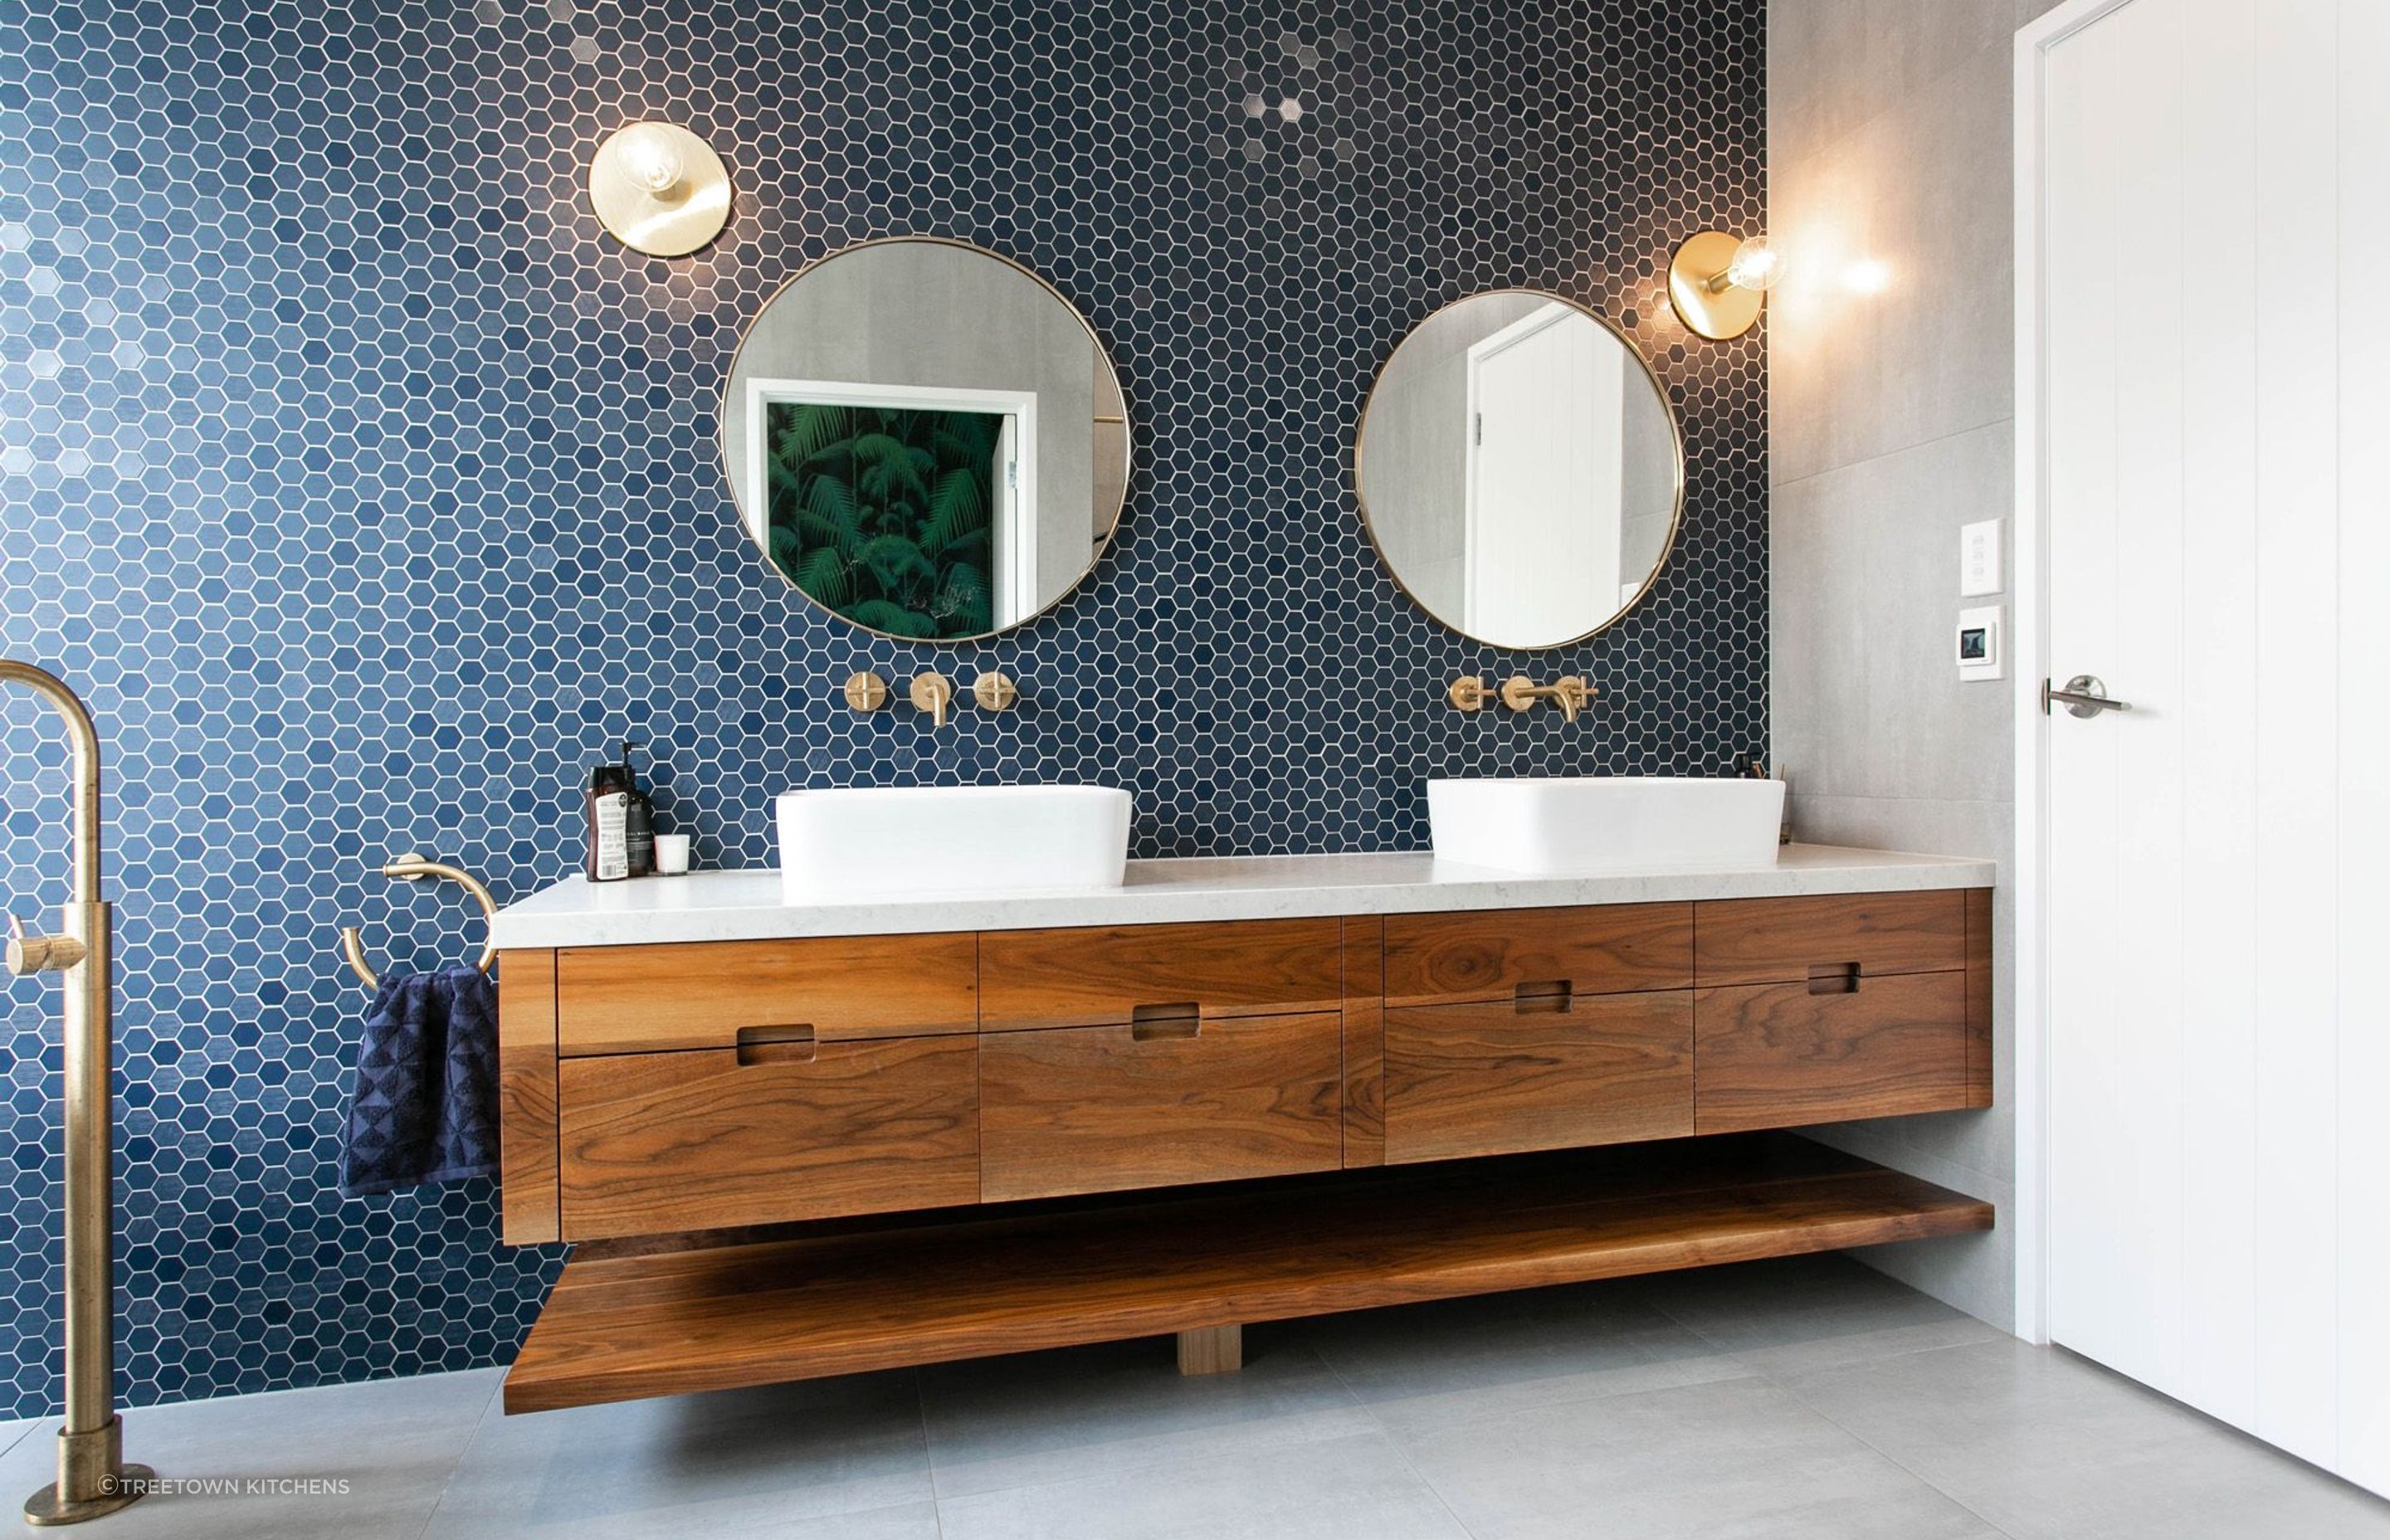 A feature wall of fine hexagon tiles in this Tamahere bathroom renovation.